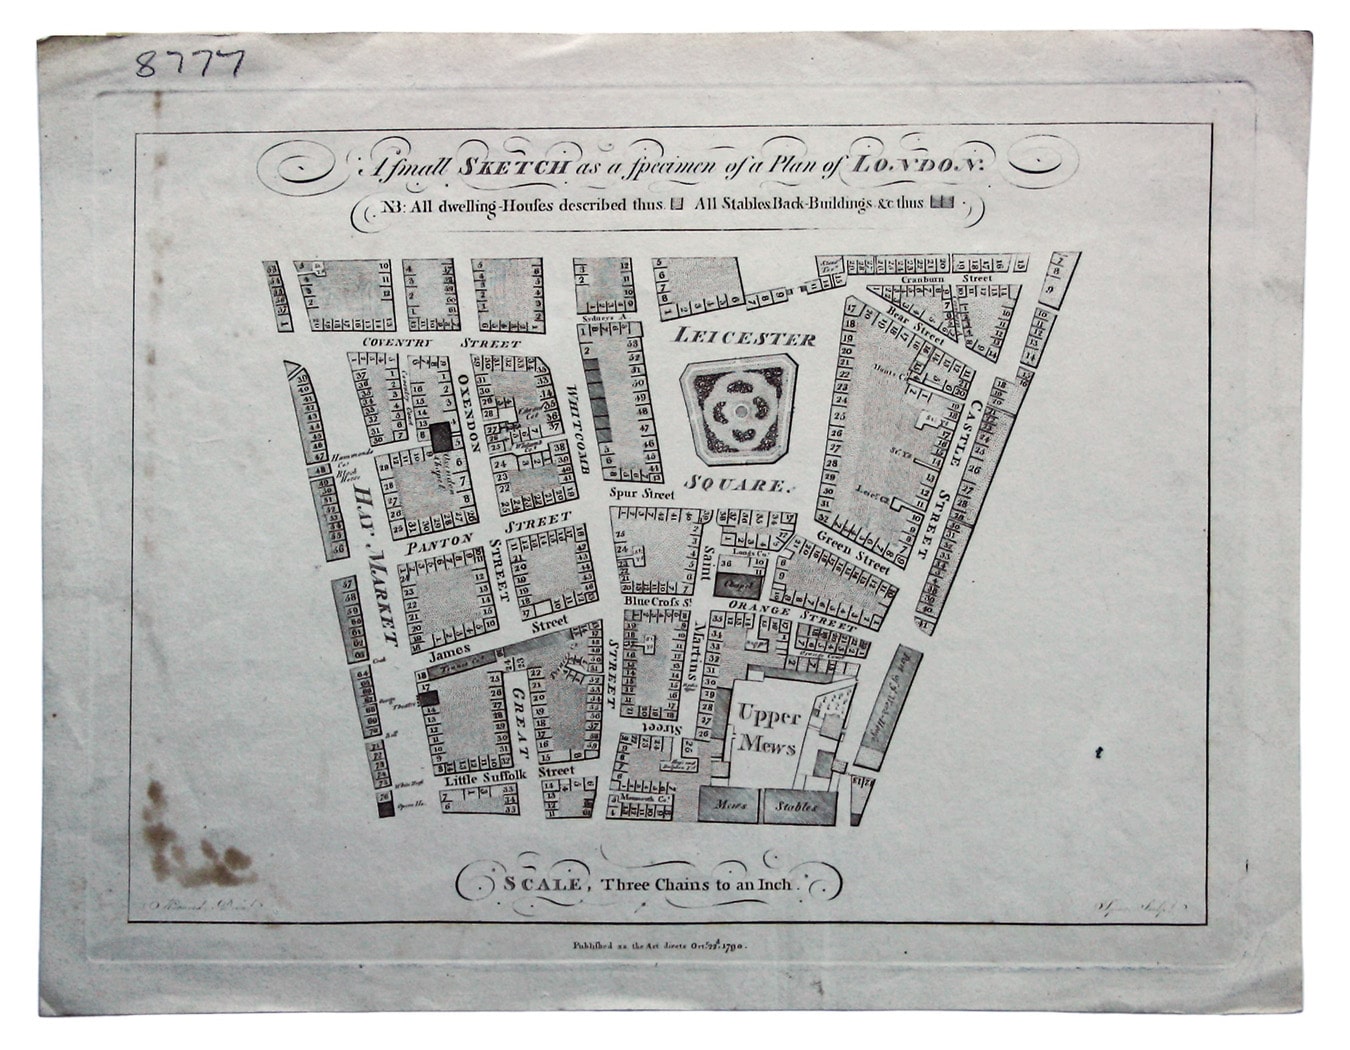 A Small Specimen of the Biggest Map: Fundraising for Horwood's Monumental Plan of London